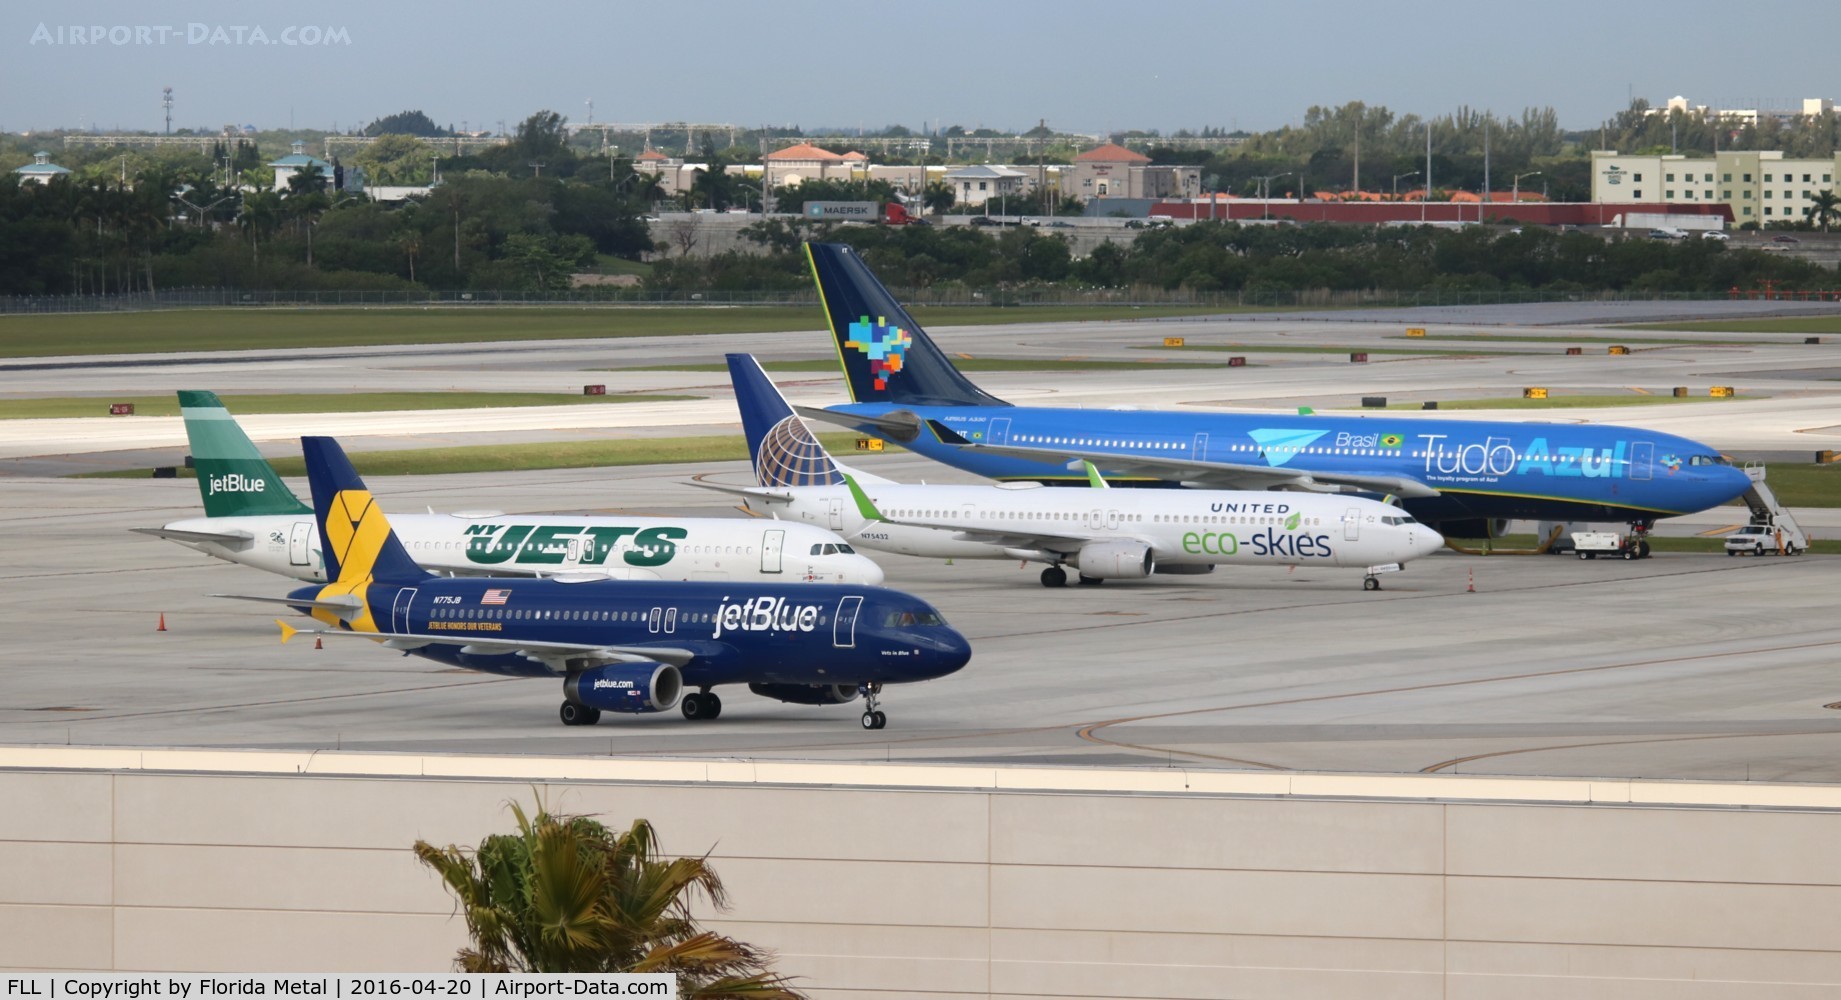 Fort Lauderdale/hollywood International Airport (FLL) - 4 special paint aircraft lined up in a row